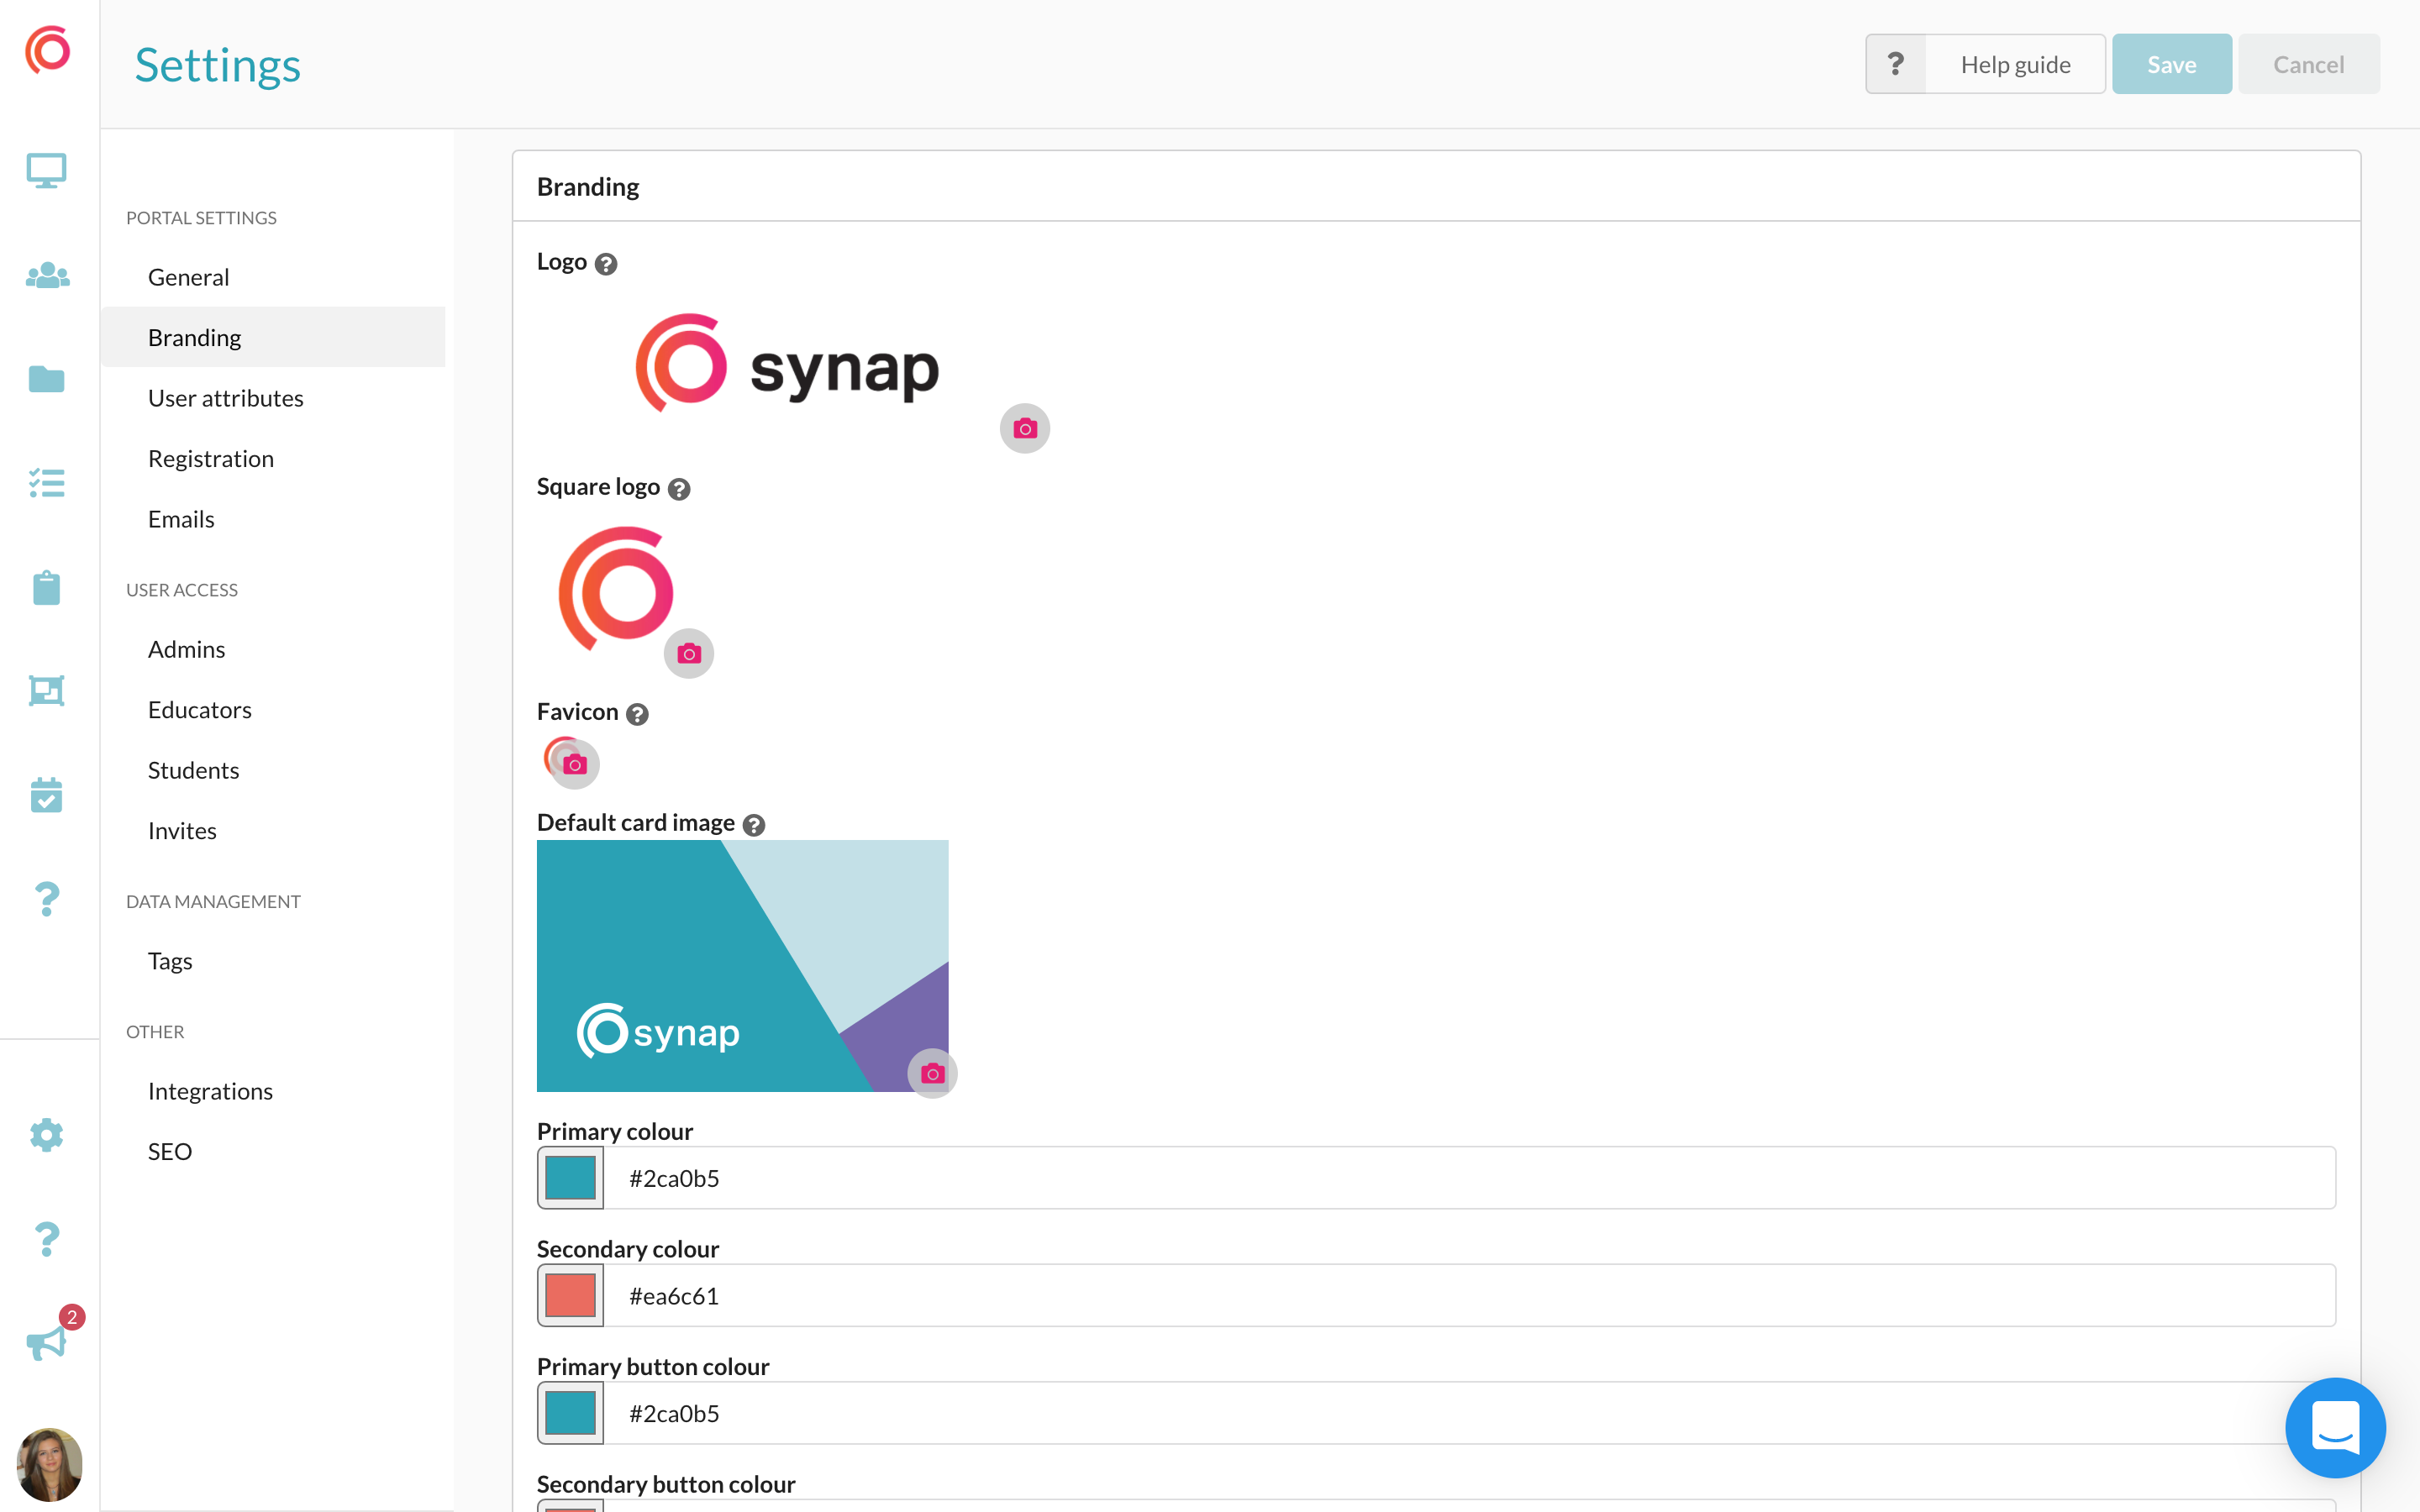 Synap Software - Brand your portal with company logos, images and colours